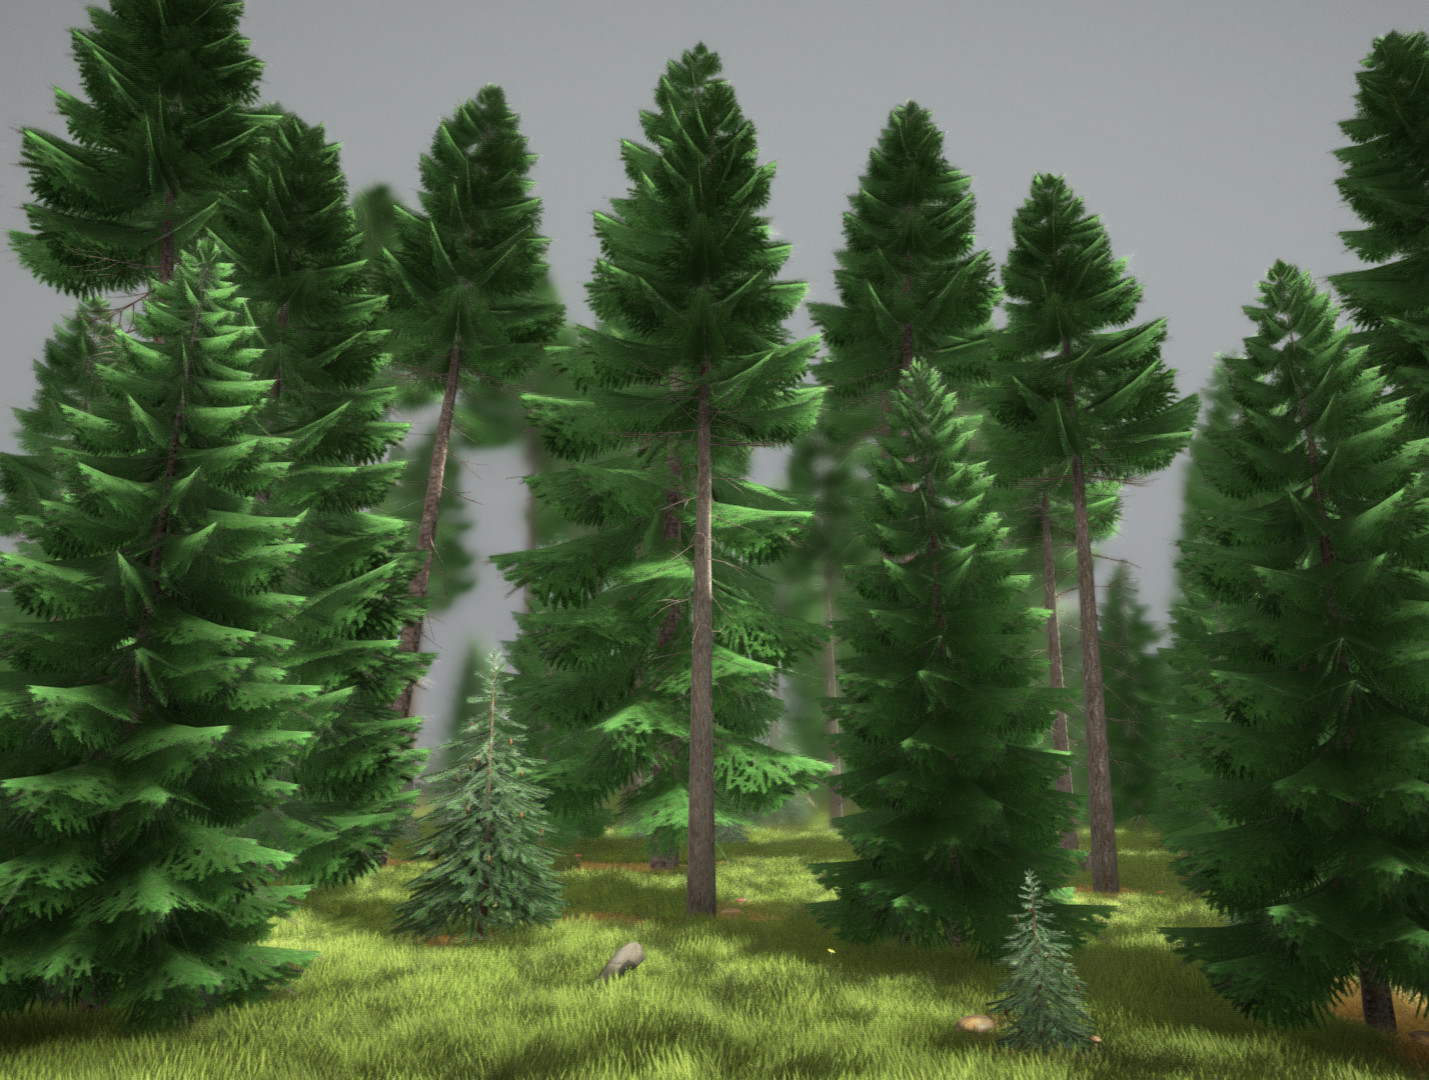 Spruce Forest